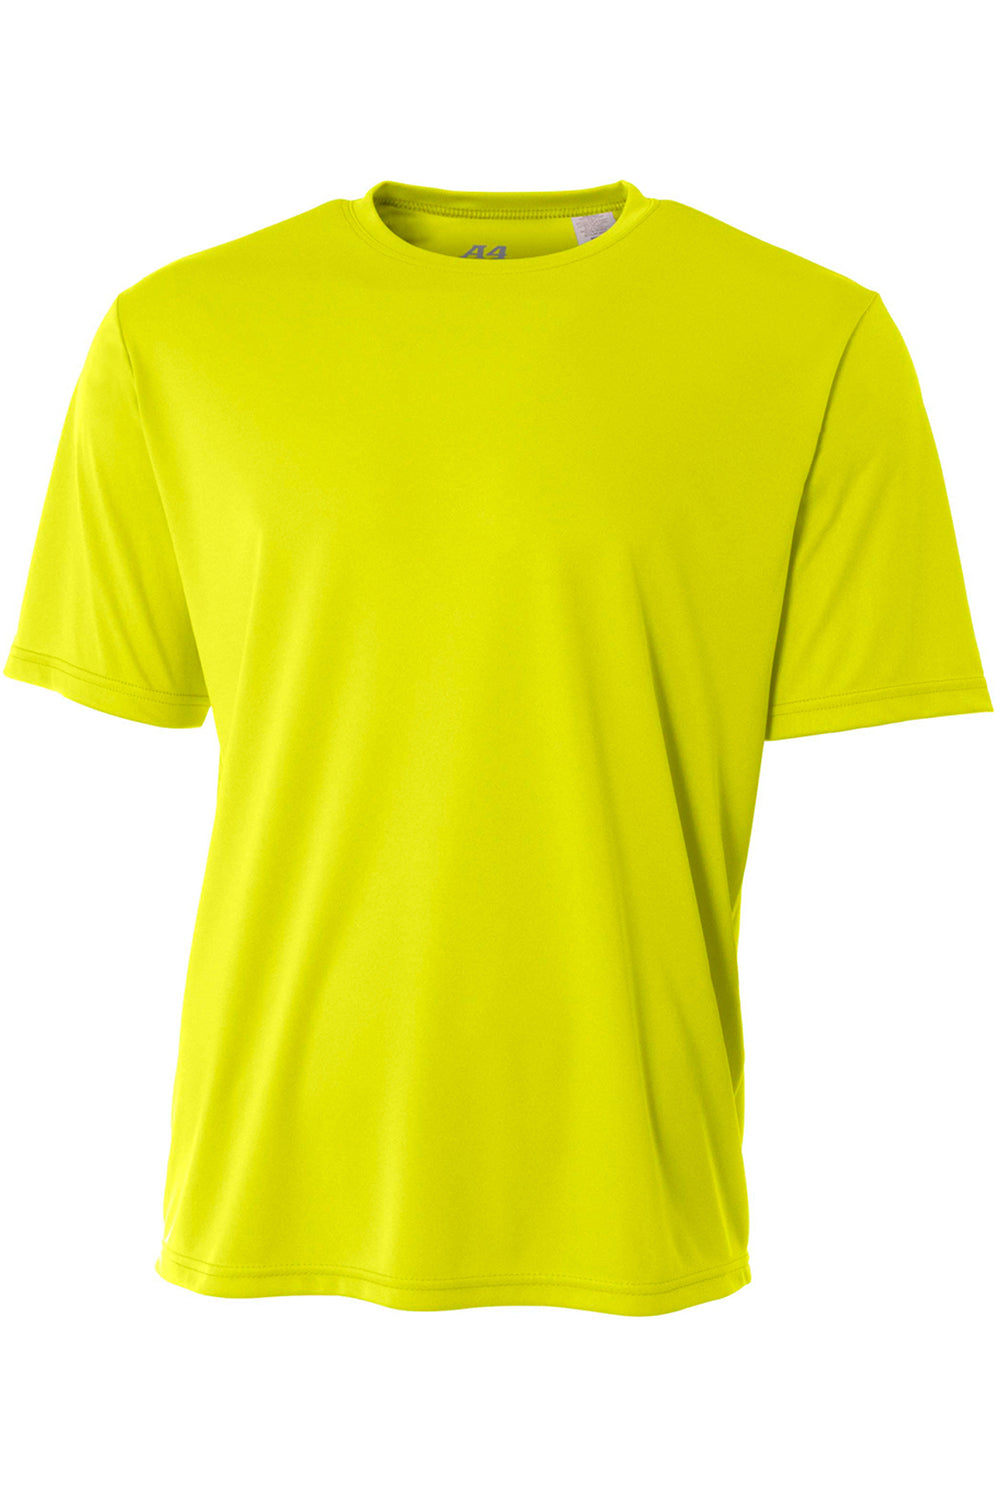 A4 N3142 Mens Performance Moisture Wicking Short Sleeve Crewneck T-Shirt Safety Yellow Flat Front